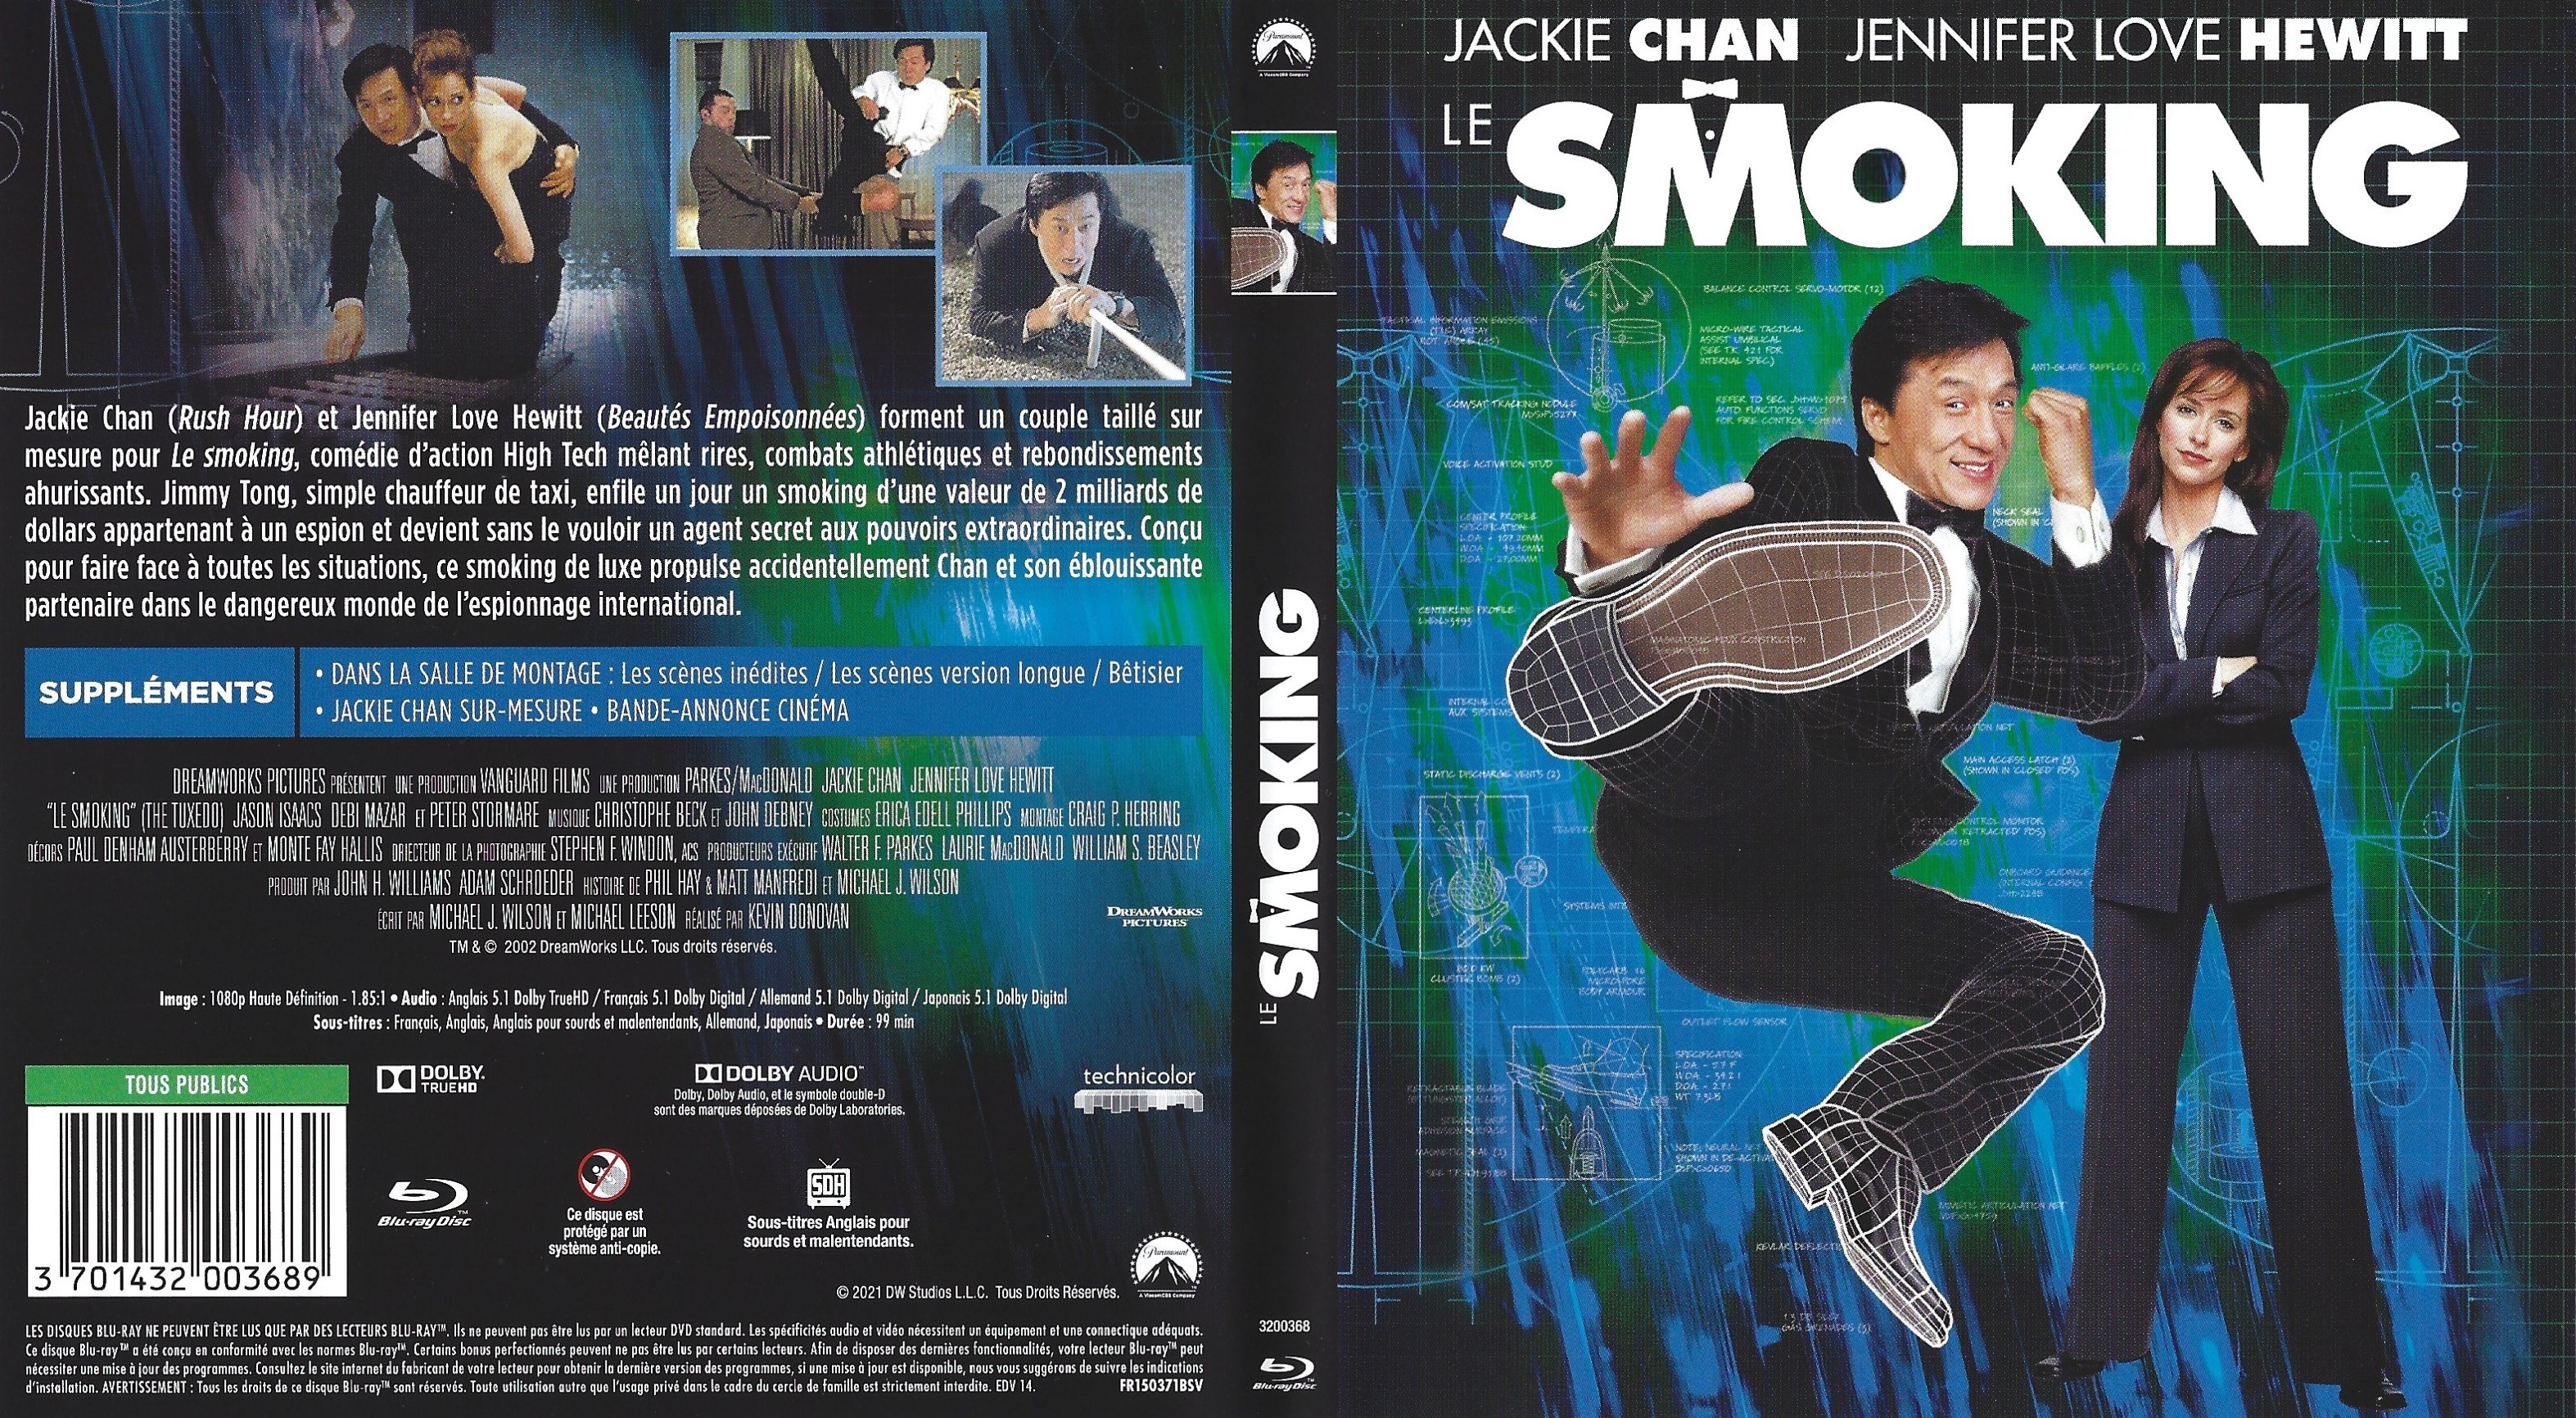 Jaquette DVD Le Smoking (BLU-RAY)